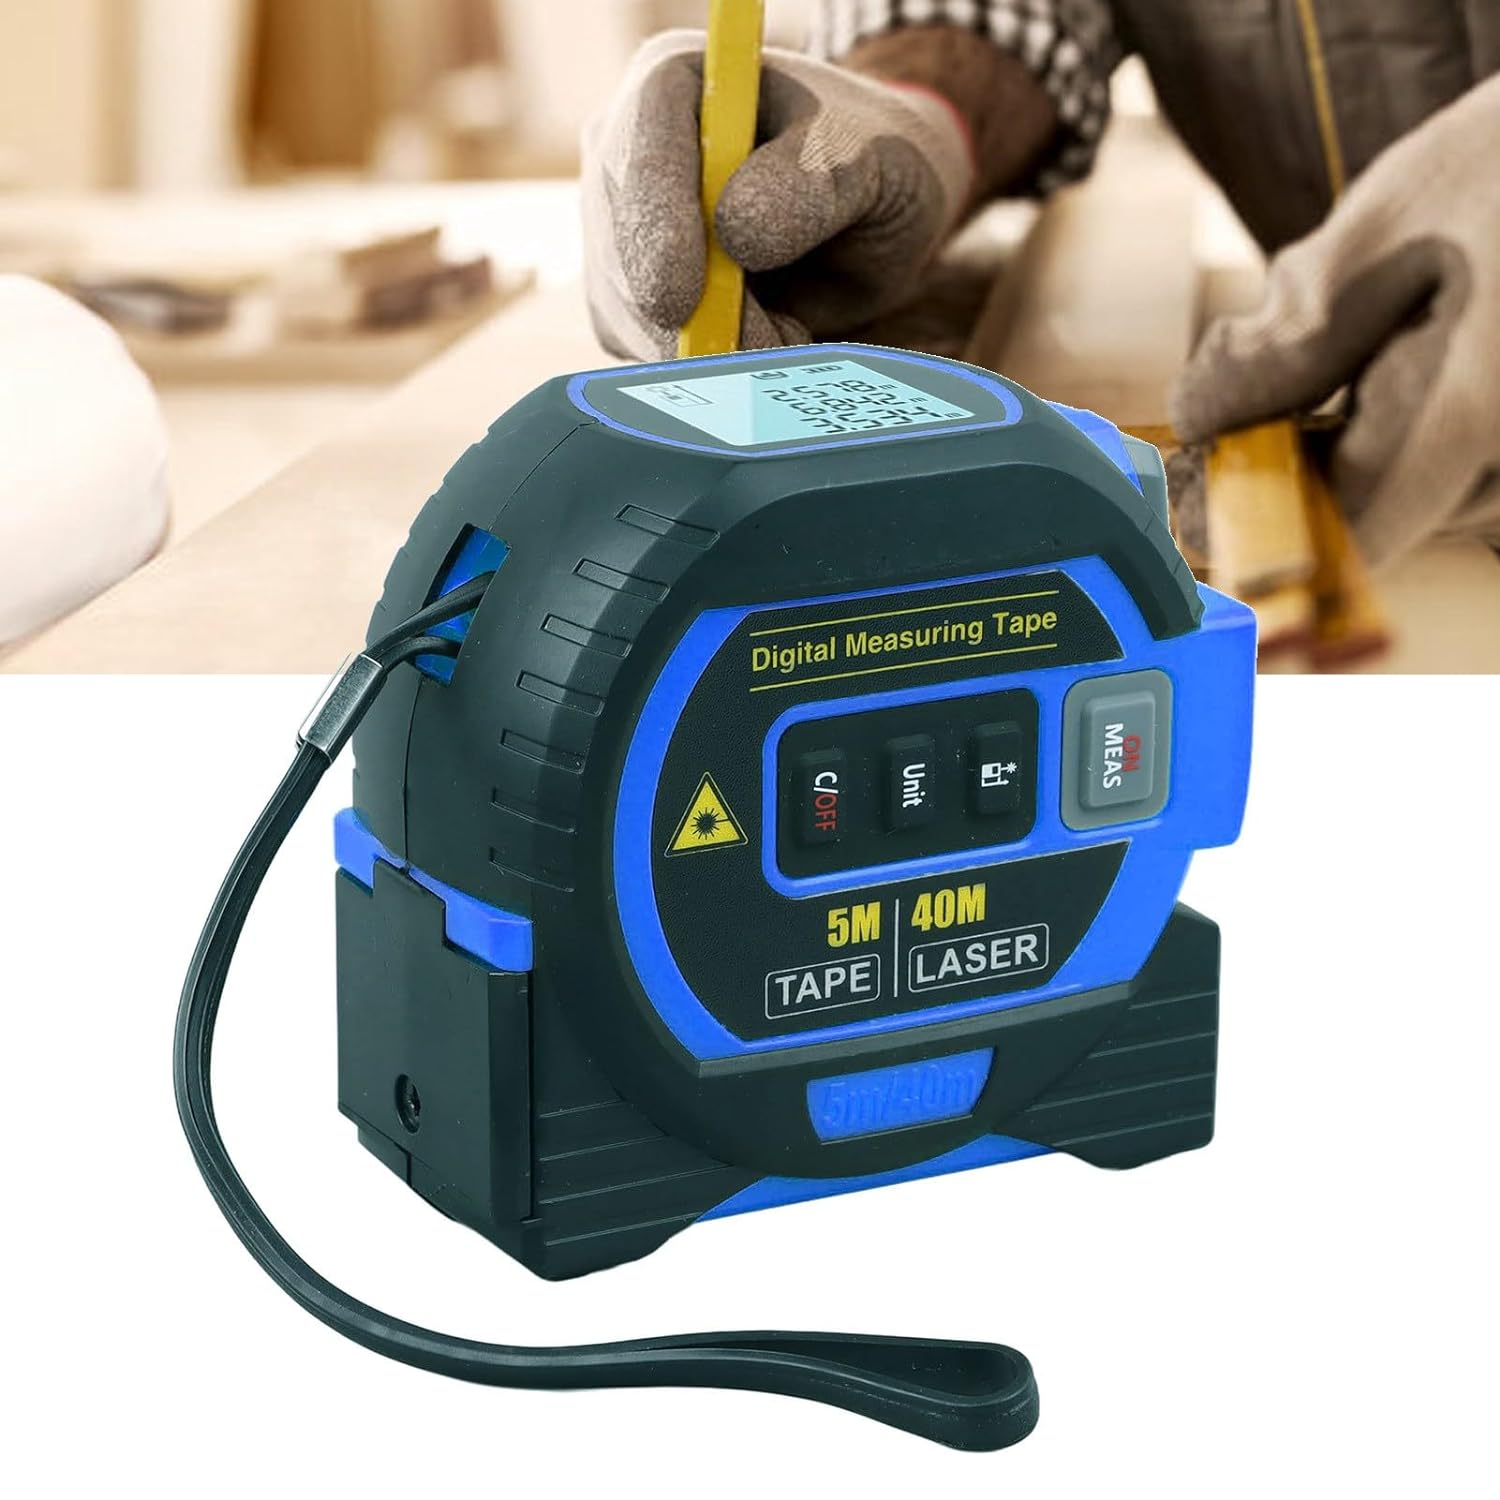 3-in-1 Blue Digital Tape Measure - 40m Elastic, Data Storage, Automated Inspection 